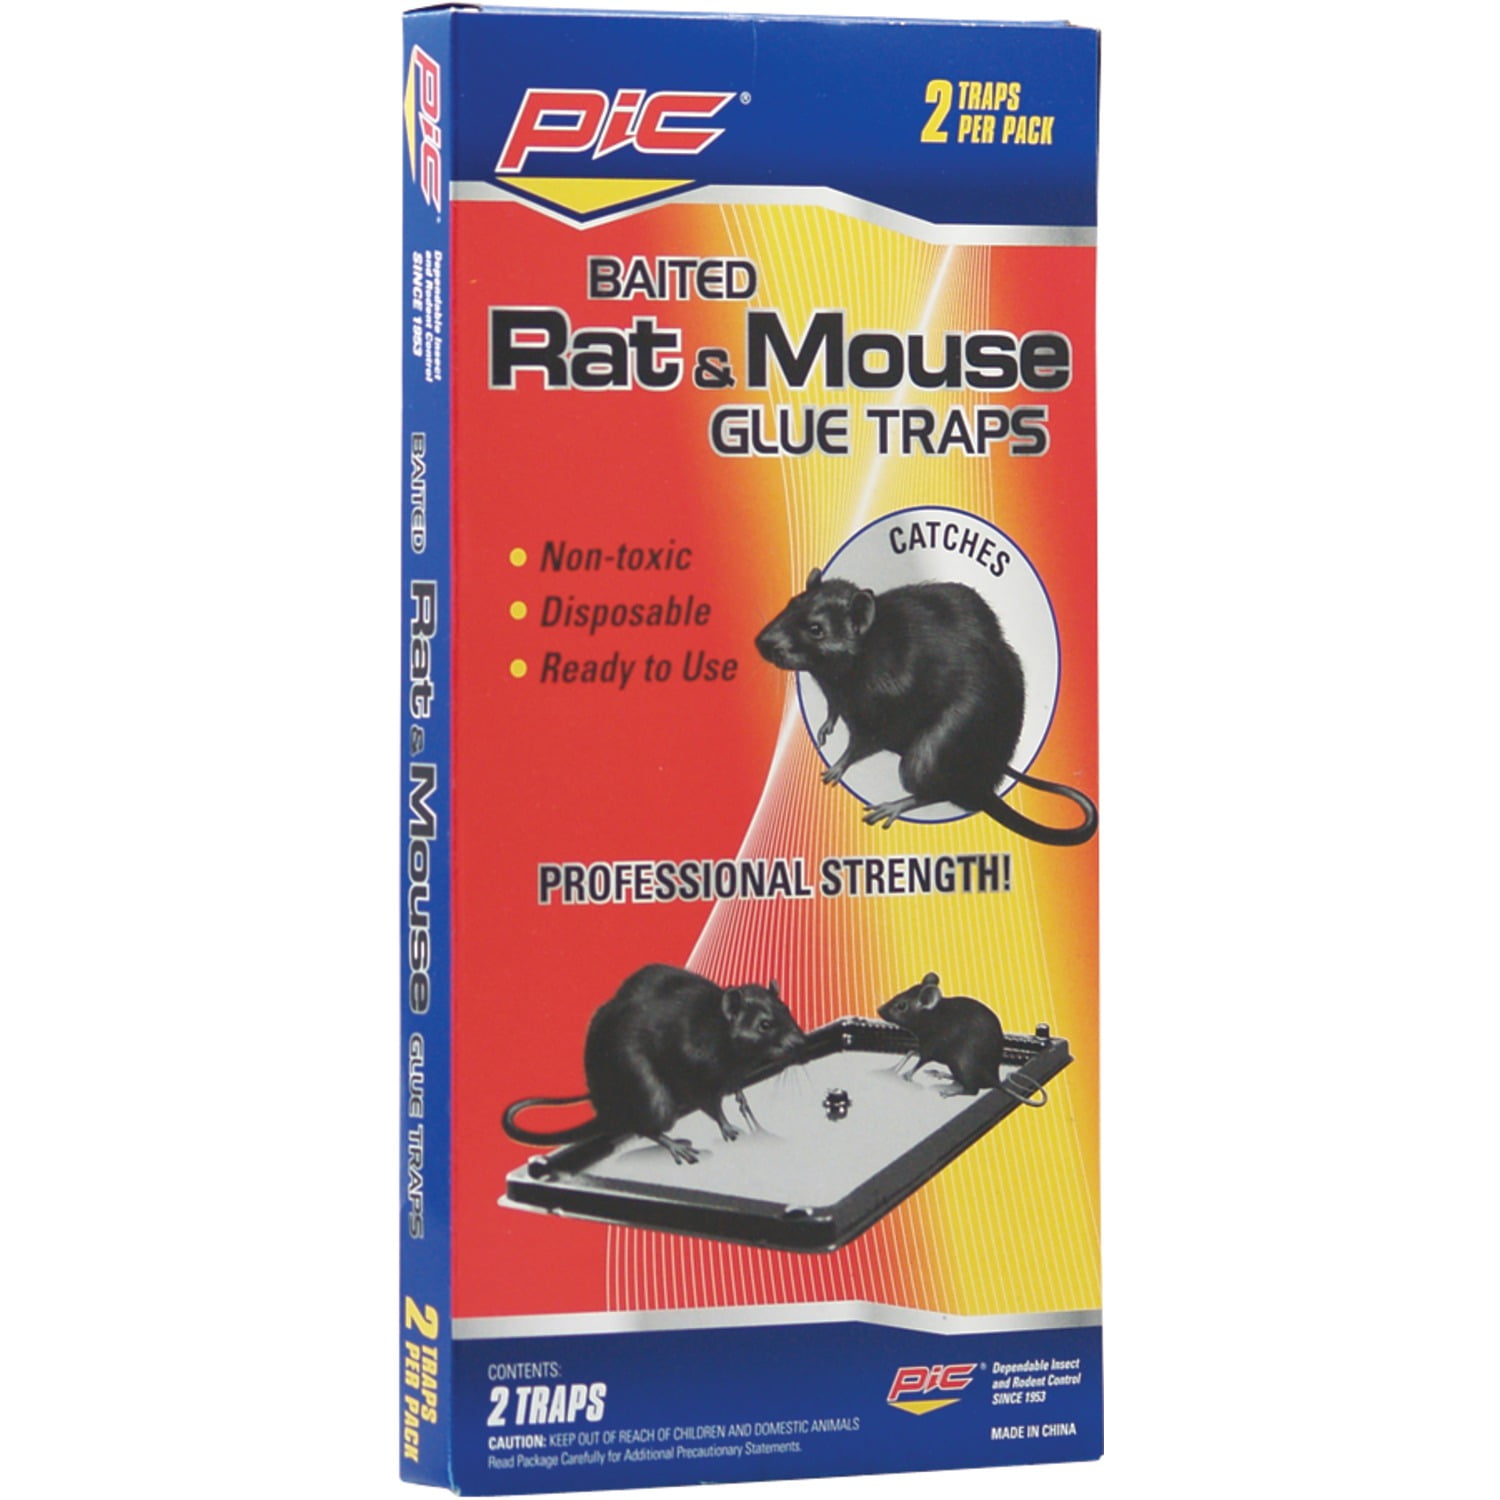  T3-R Triple High Impact Mice, Rat, Rodent Repeller